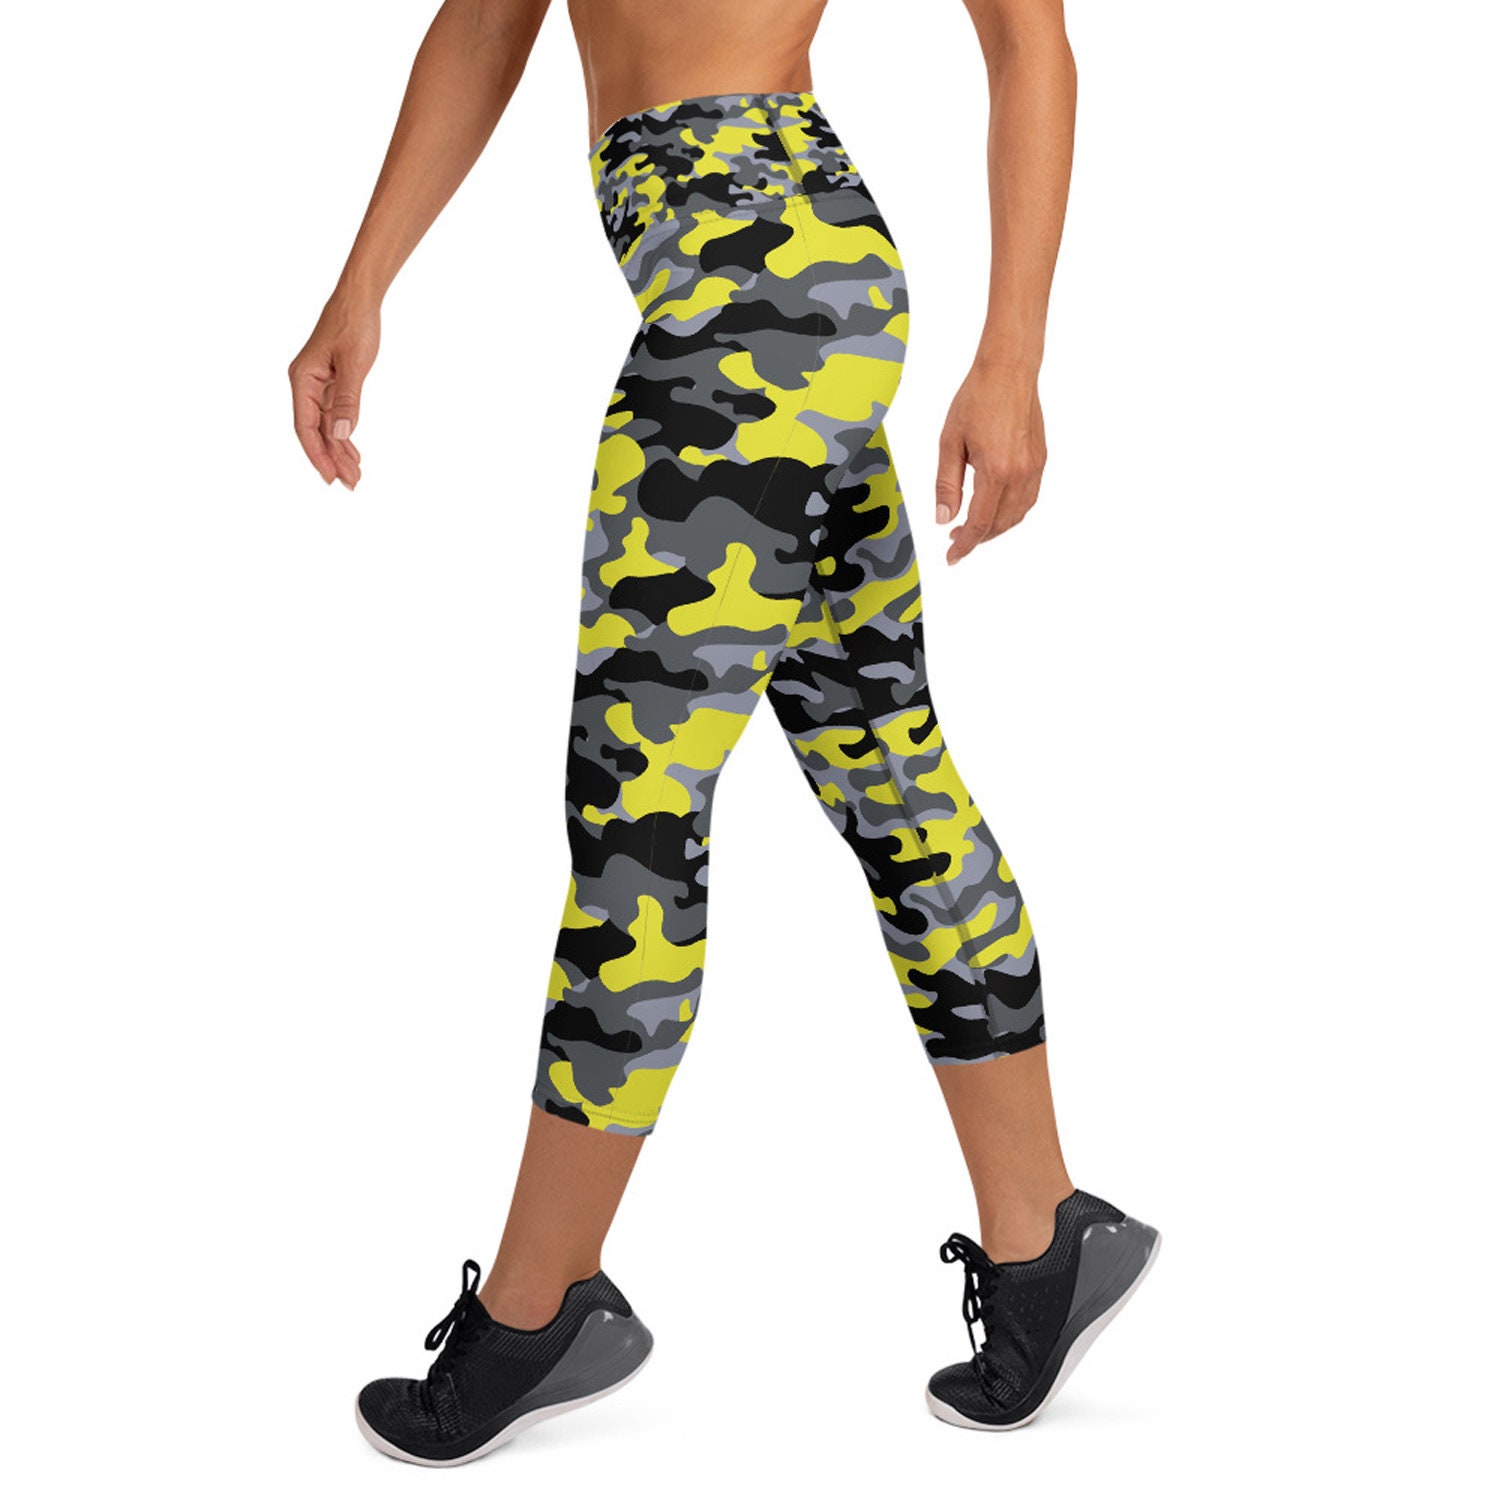 Yellow Camouflage Yoga Capri Leggings for Women High Waisted Mid Calf Length  Camo Pattern Workout Pants Perfect for Running and Crossfit -  Norway